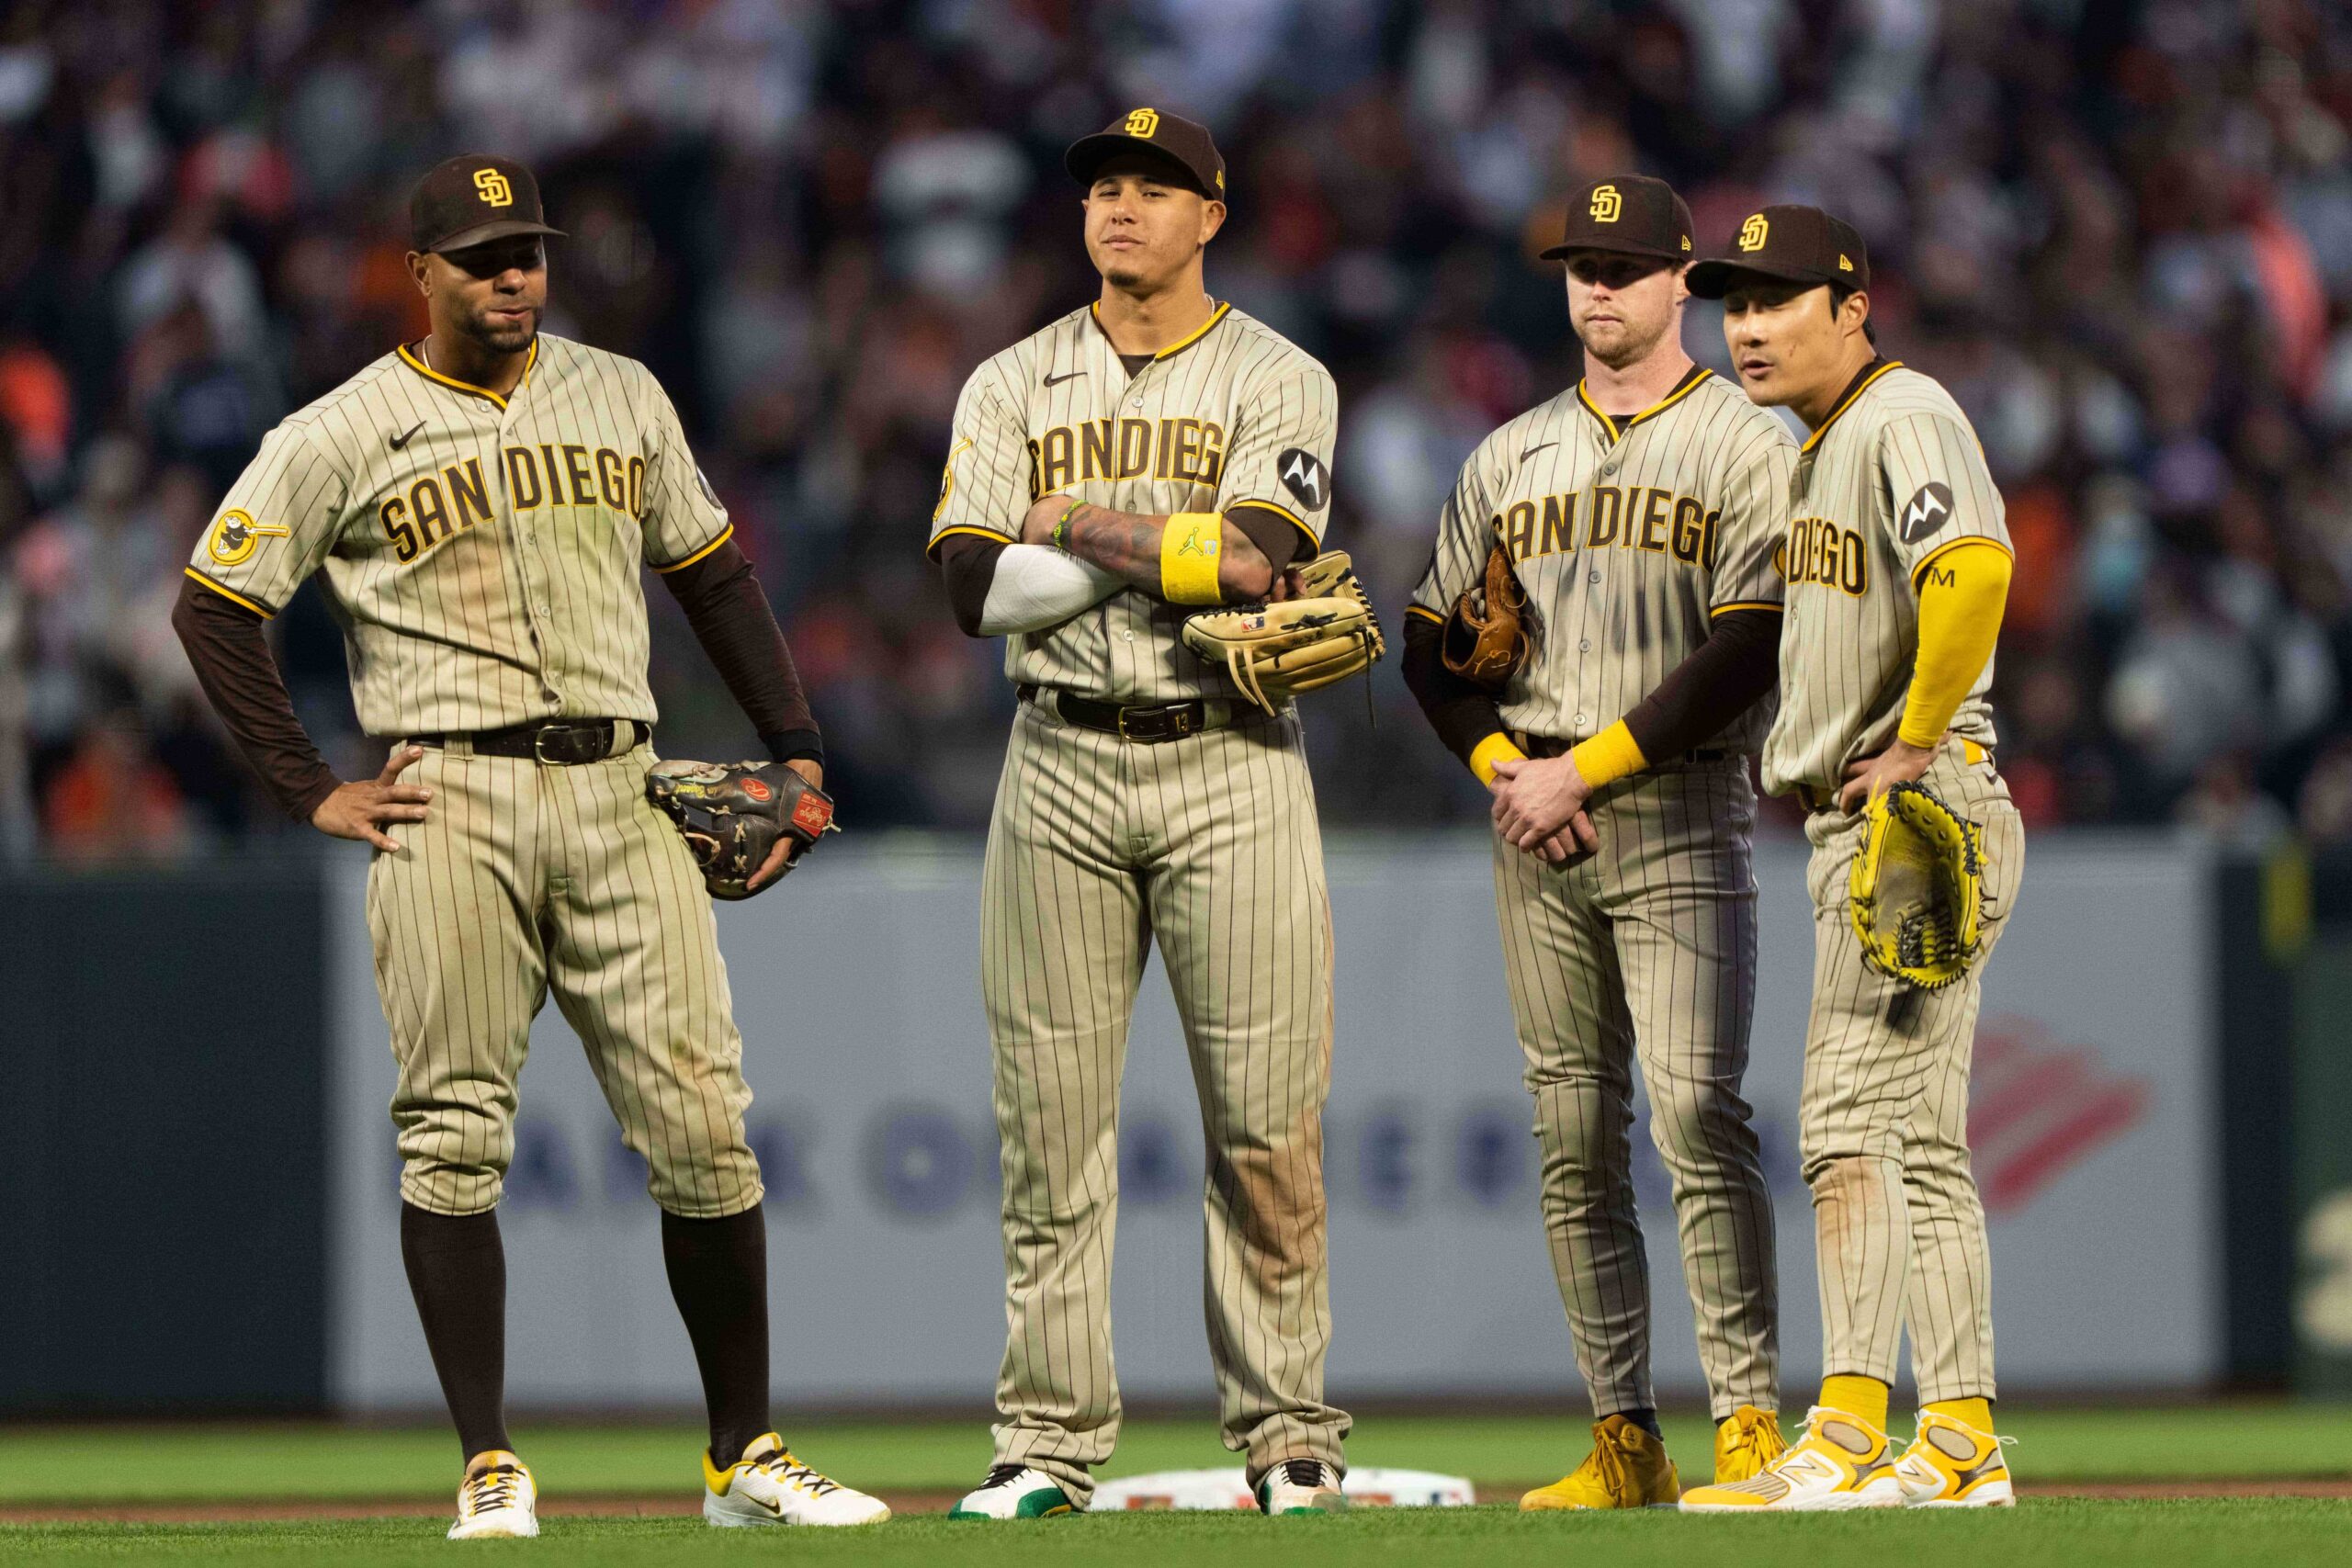 Padres to introduce new uniforms on April 15, Sports